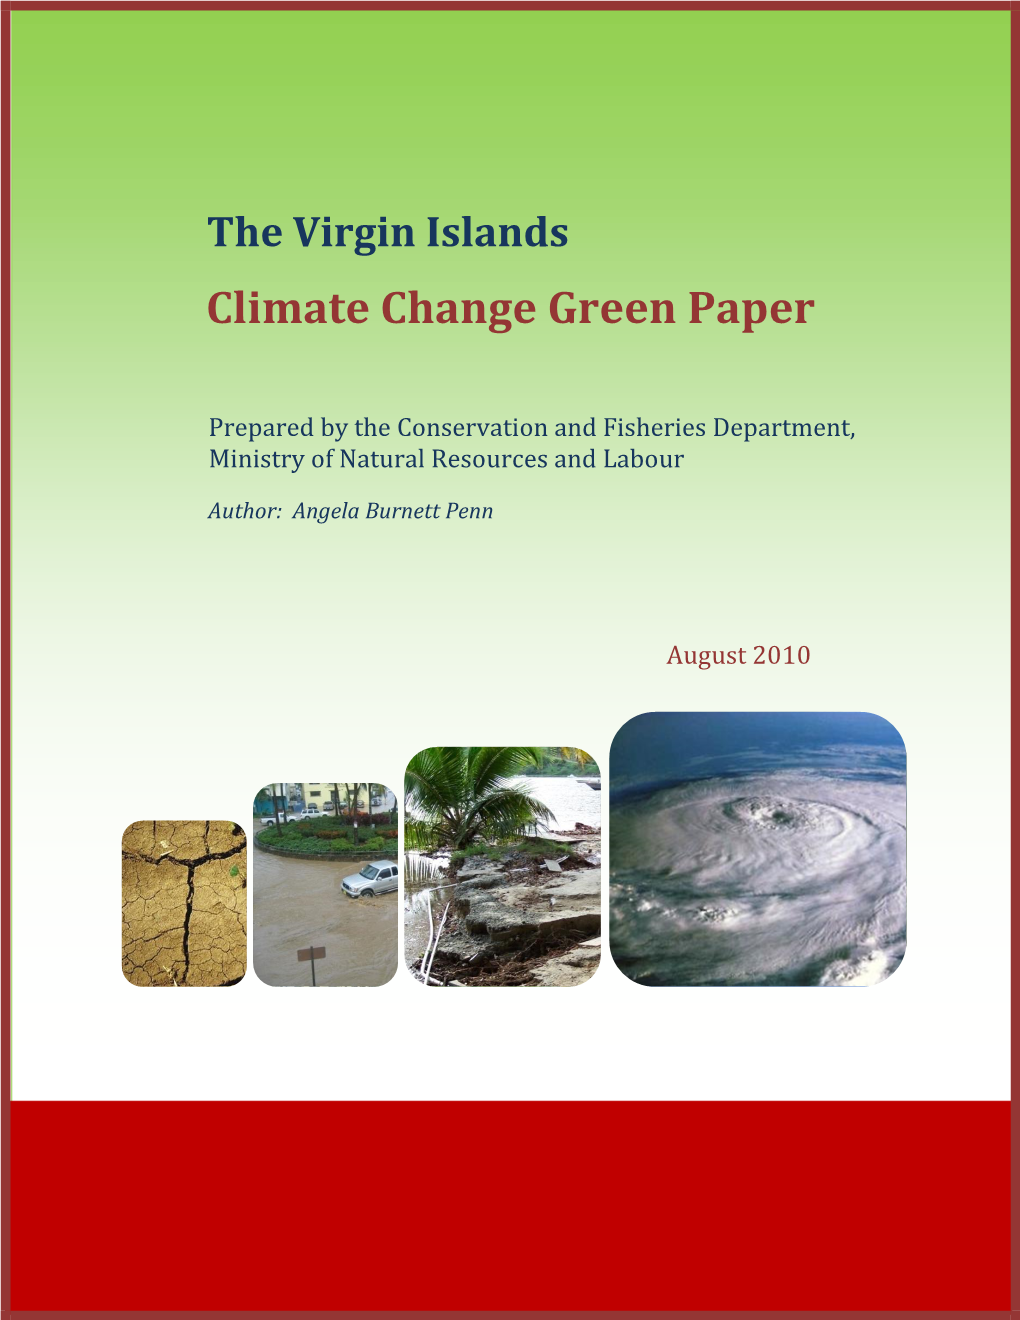 The Virgin Islands Climate Change Green Paper